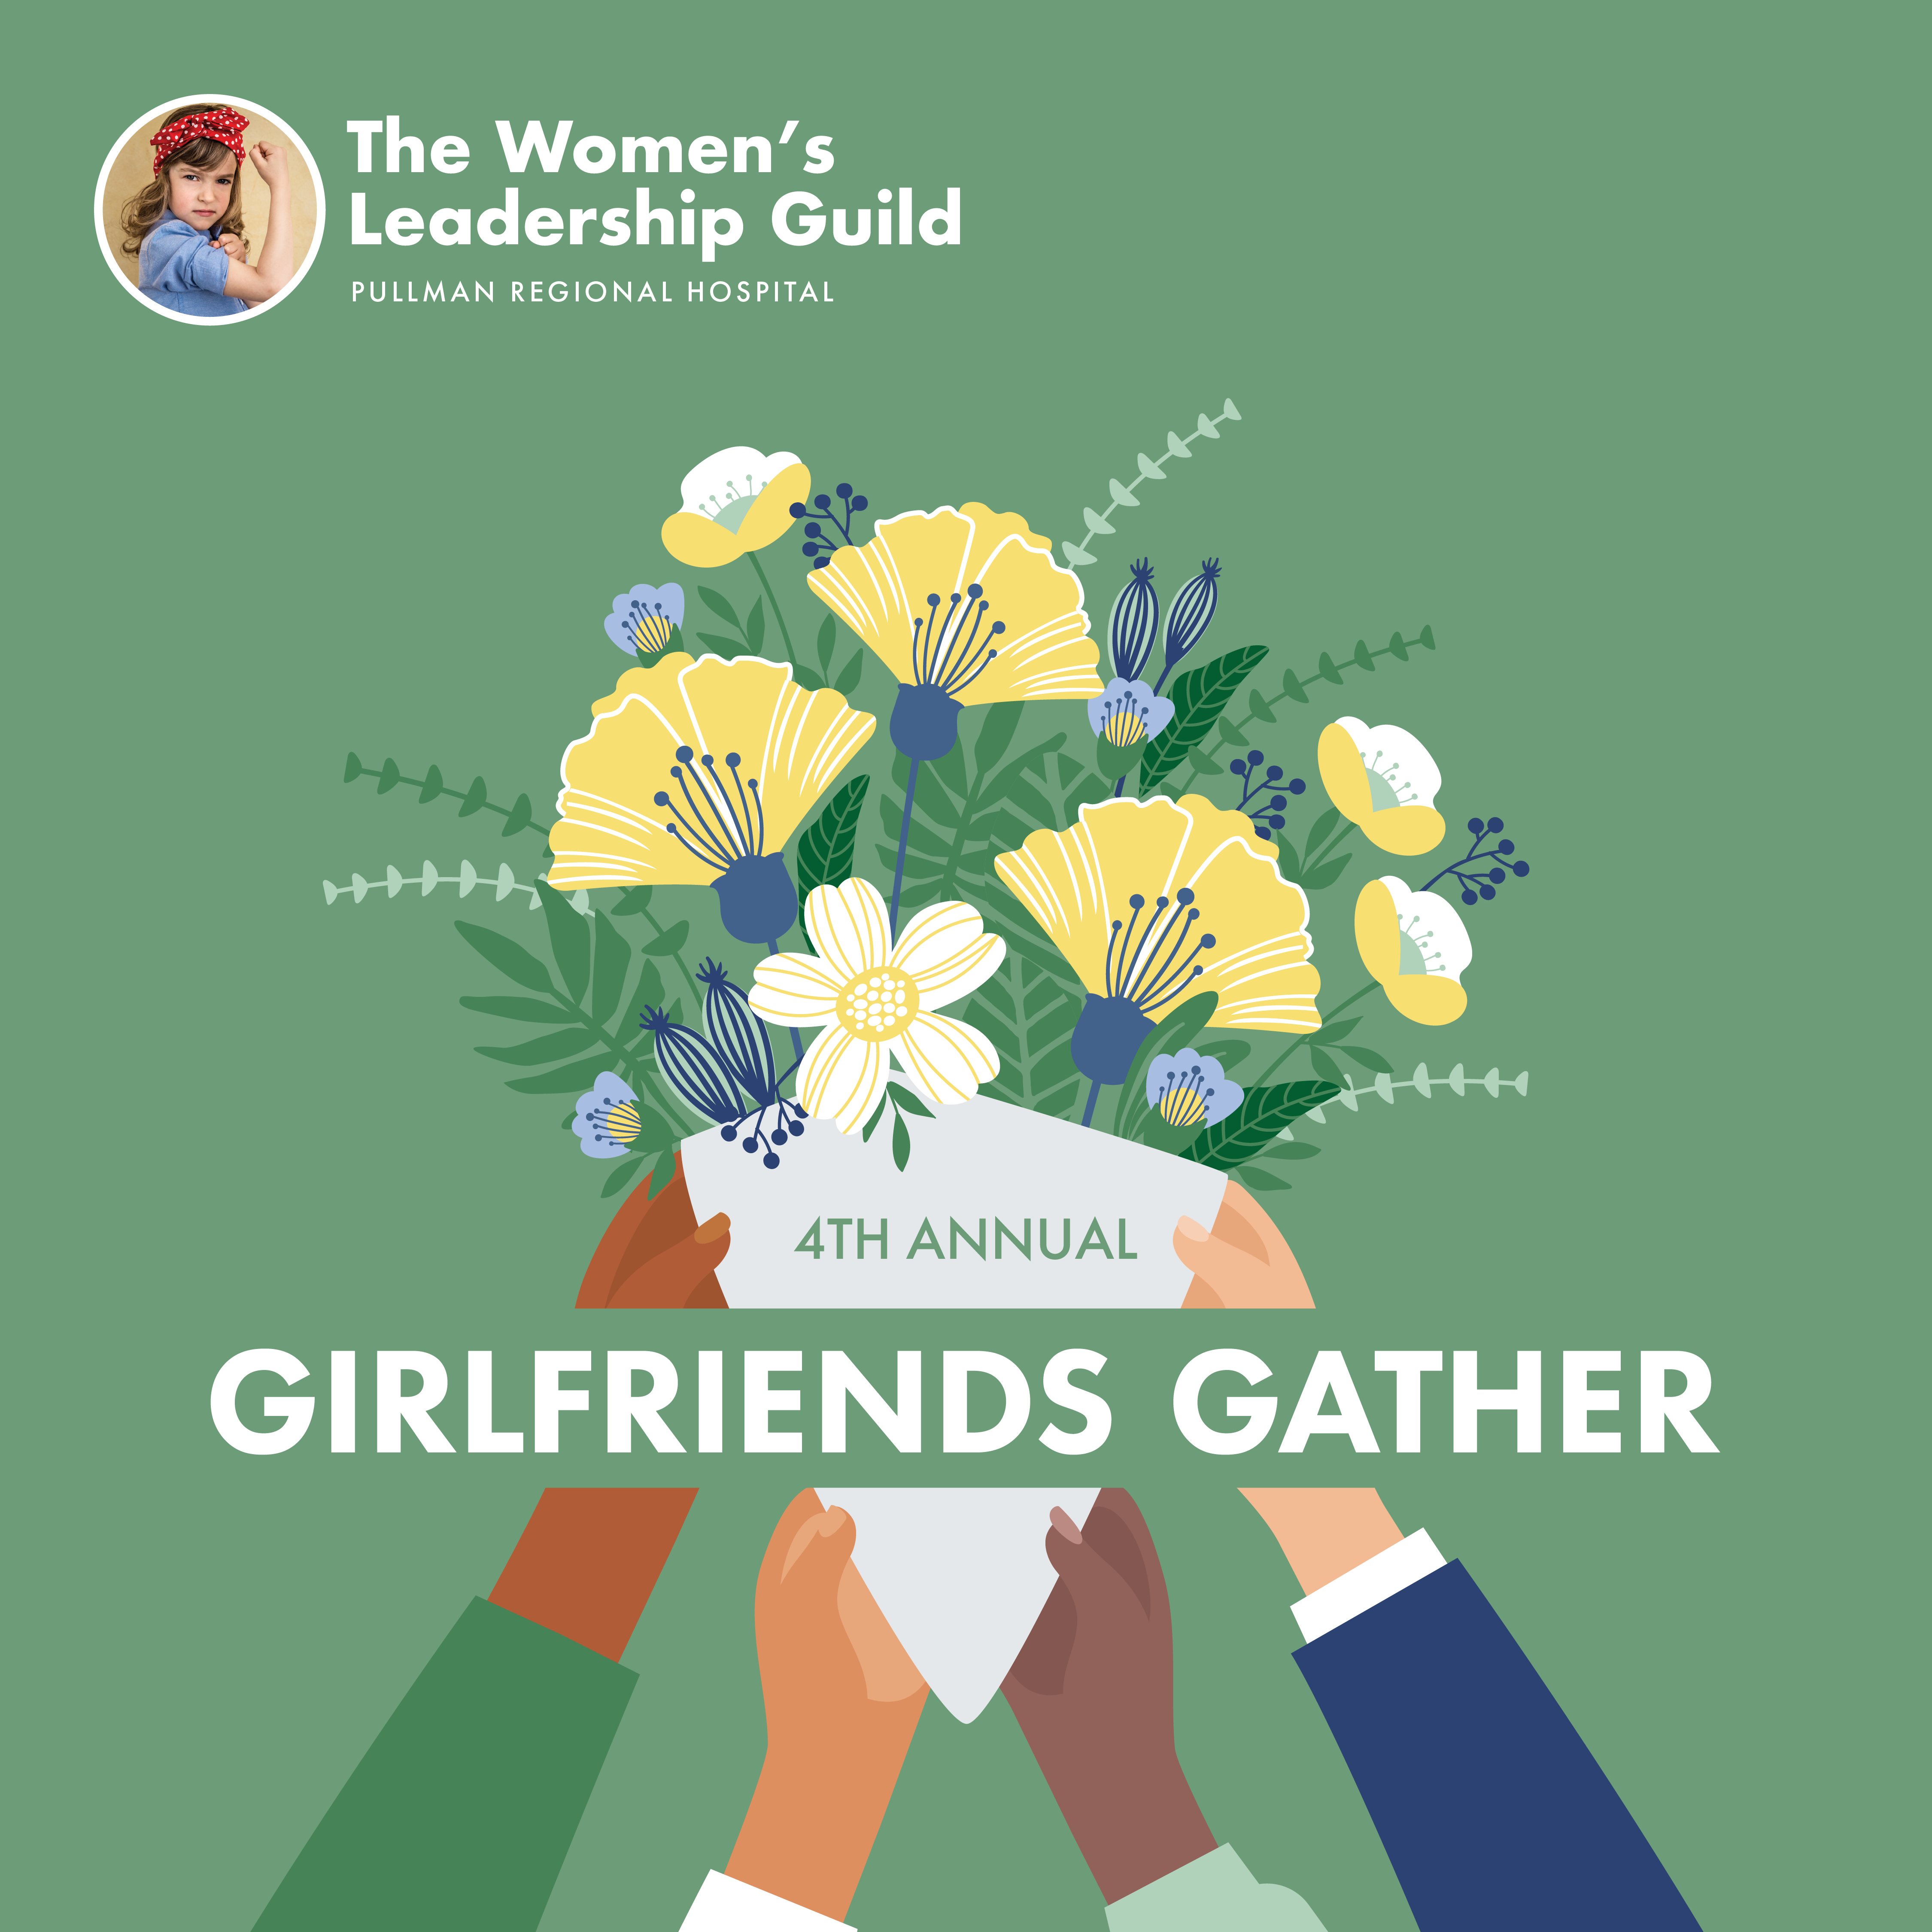 Women’s Leadership Guild Event to Give Away $10,000